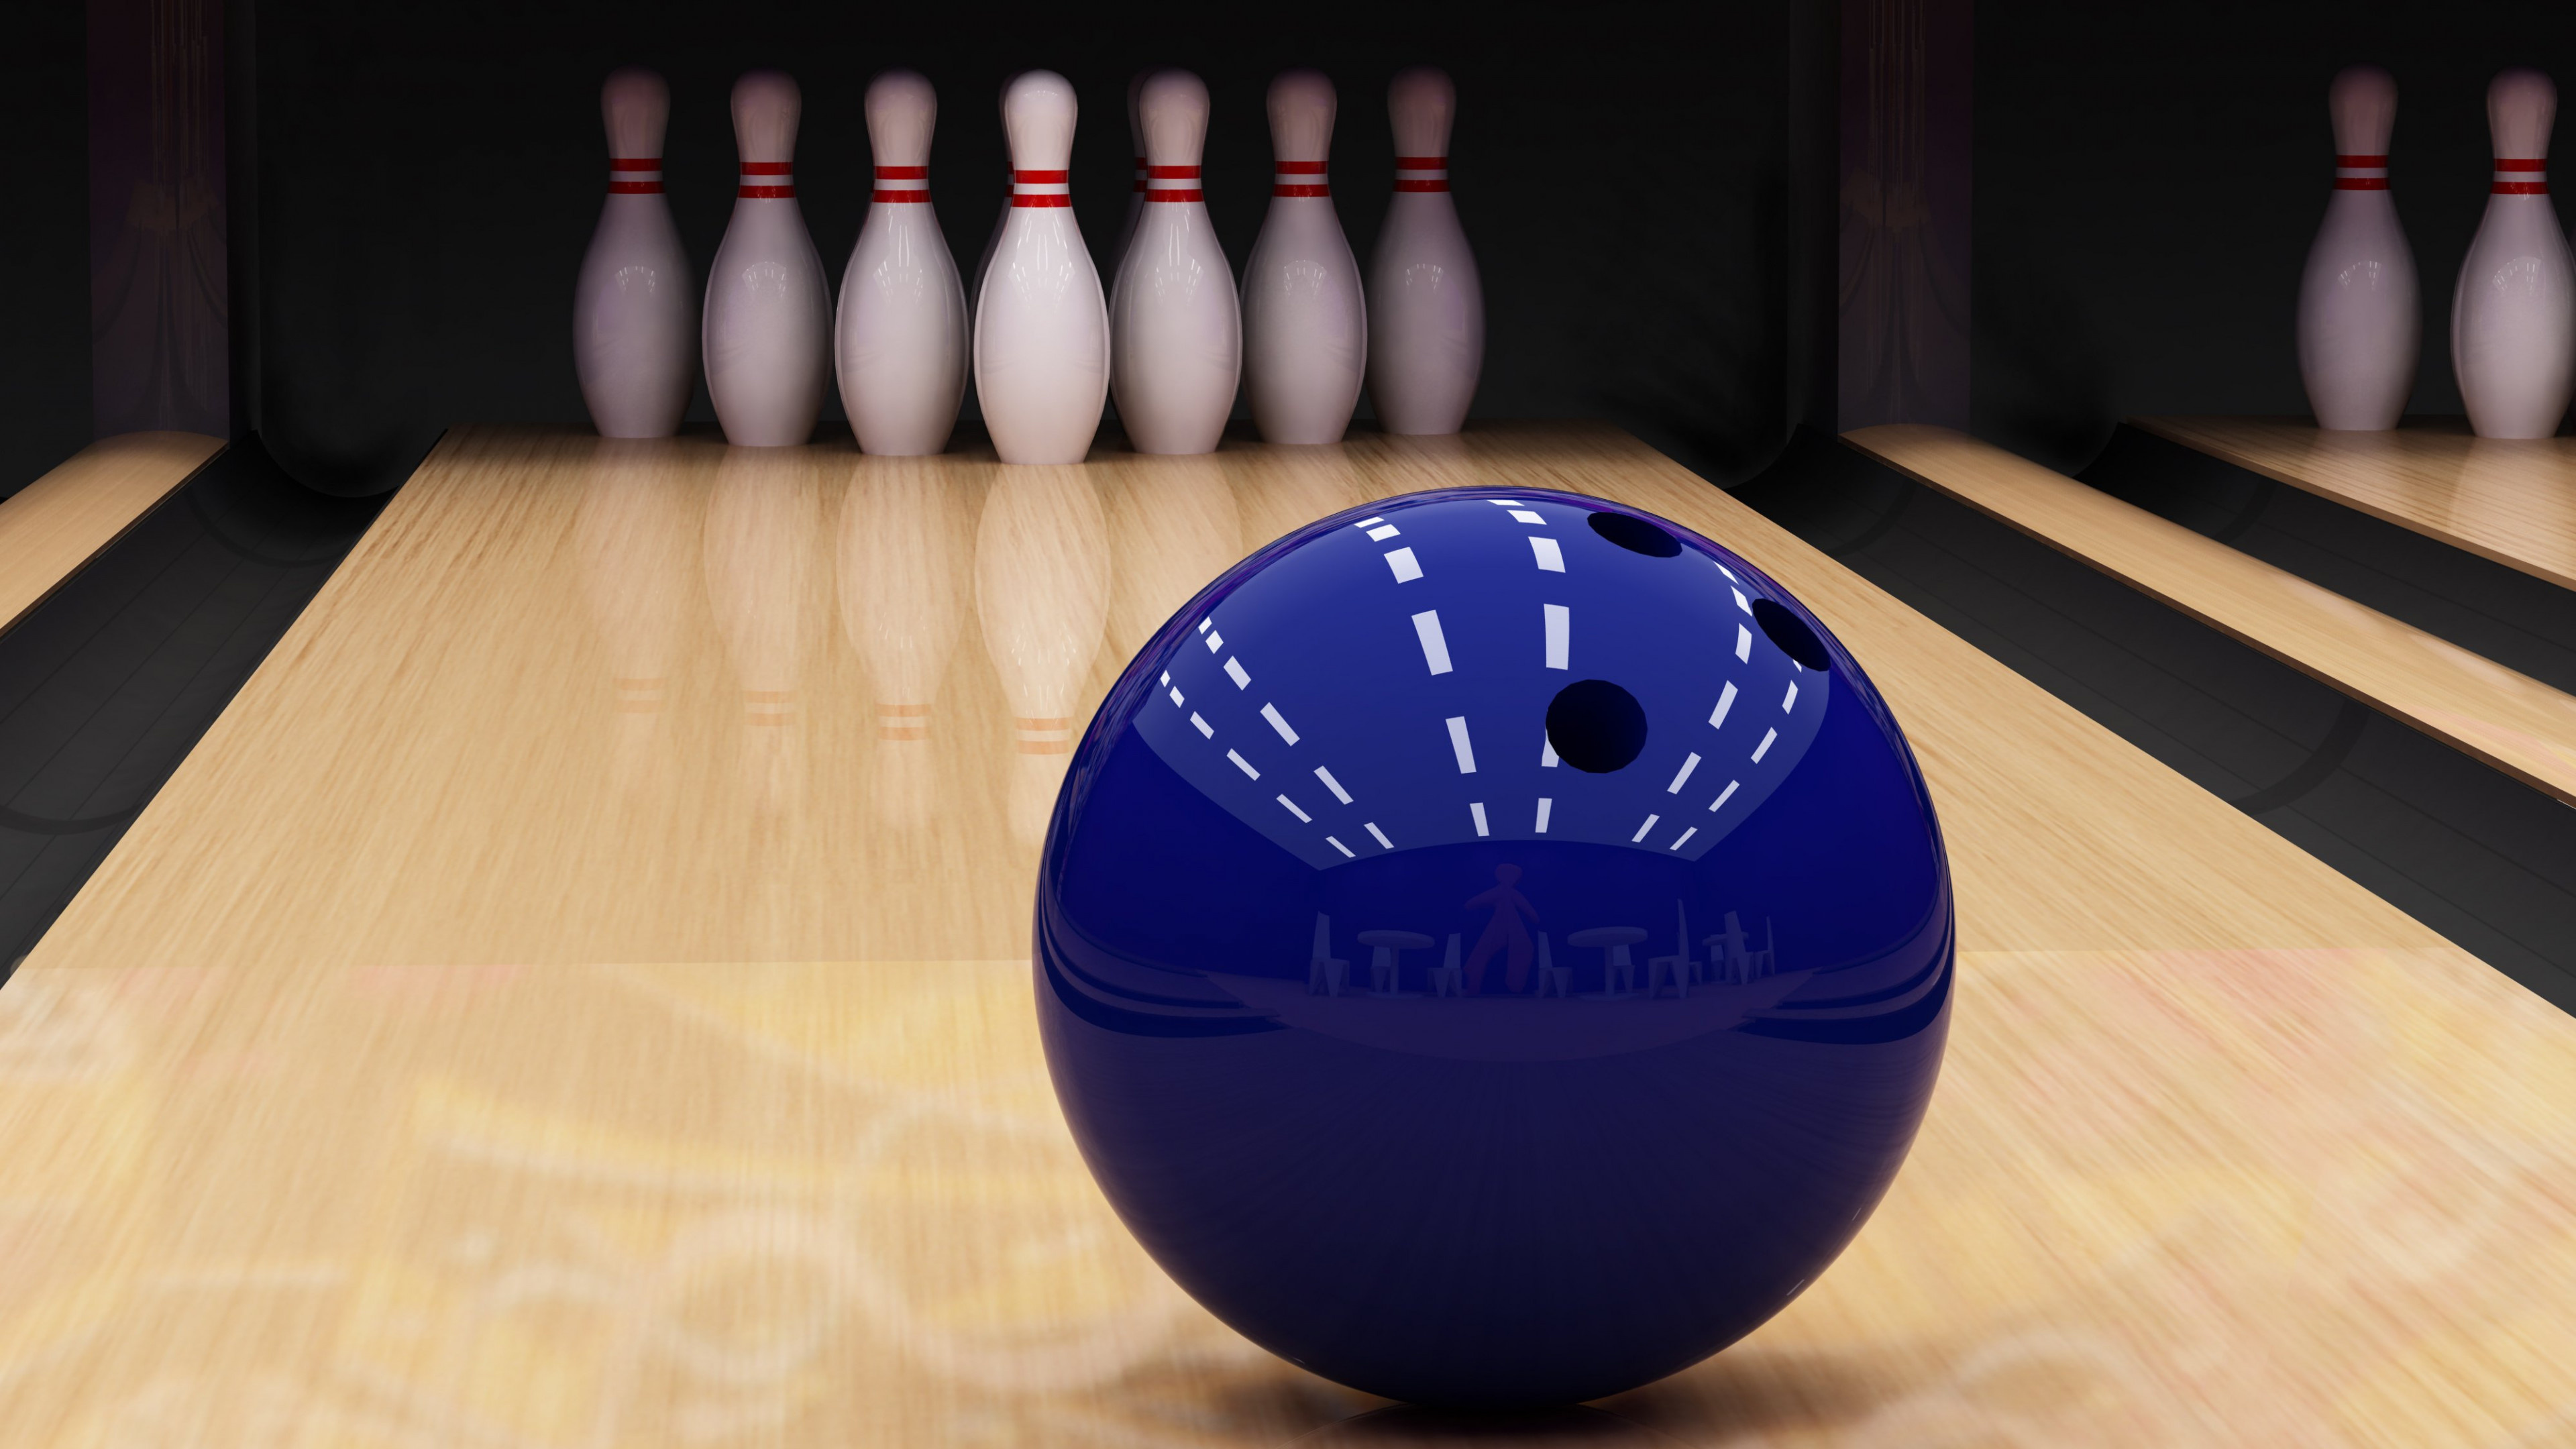 Bowling: A game which goal is to knock over pins on a long playing surface. 3840x2160 4K Background.